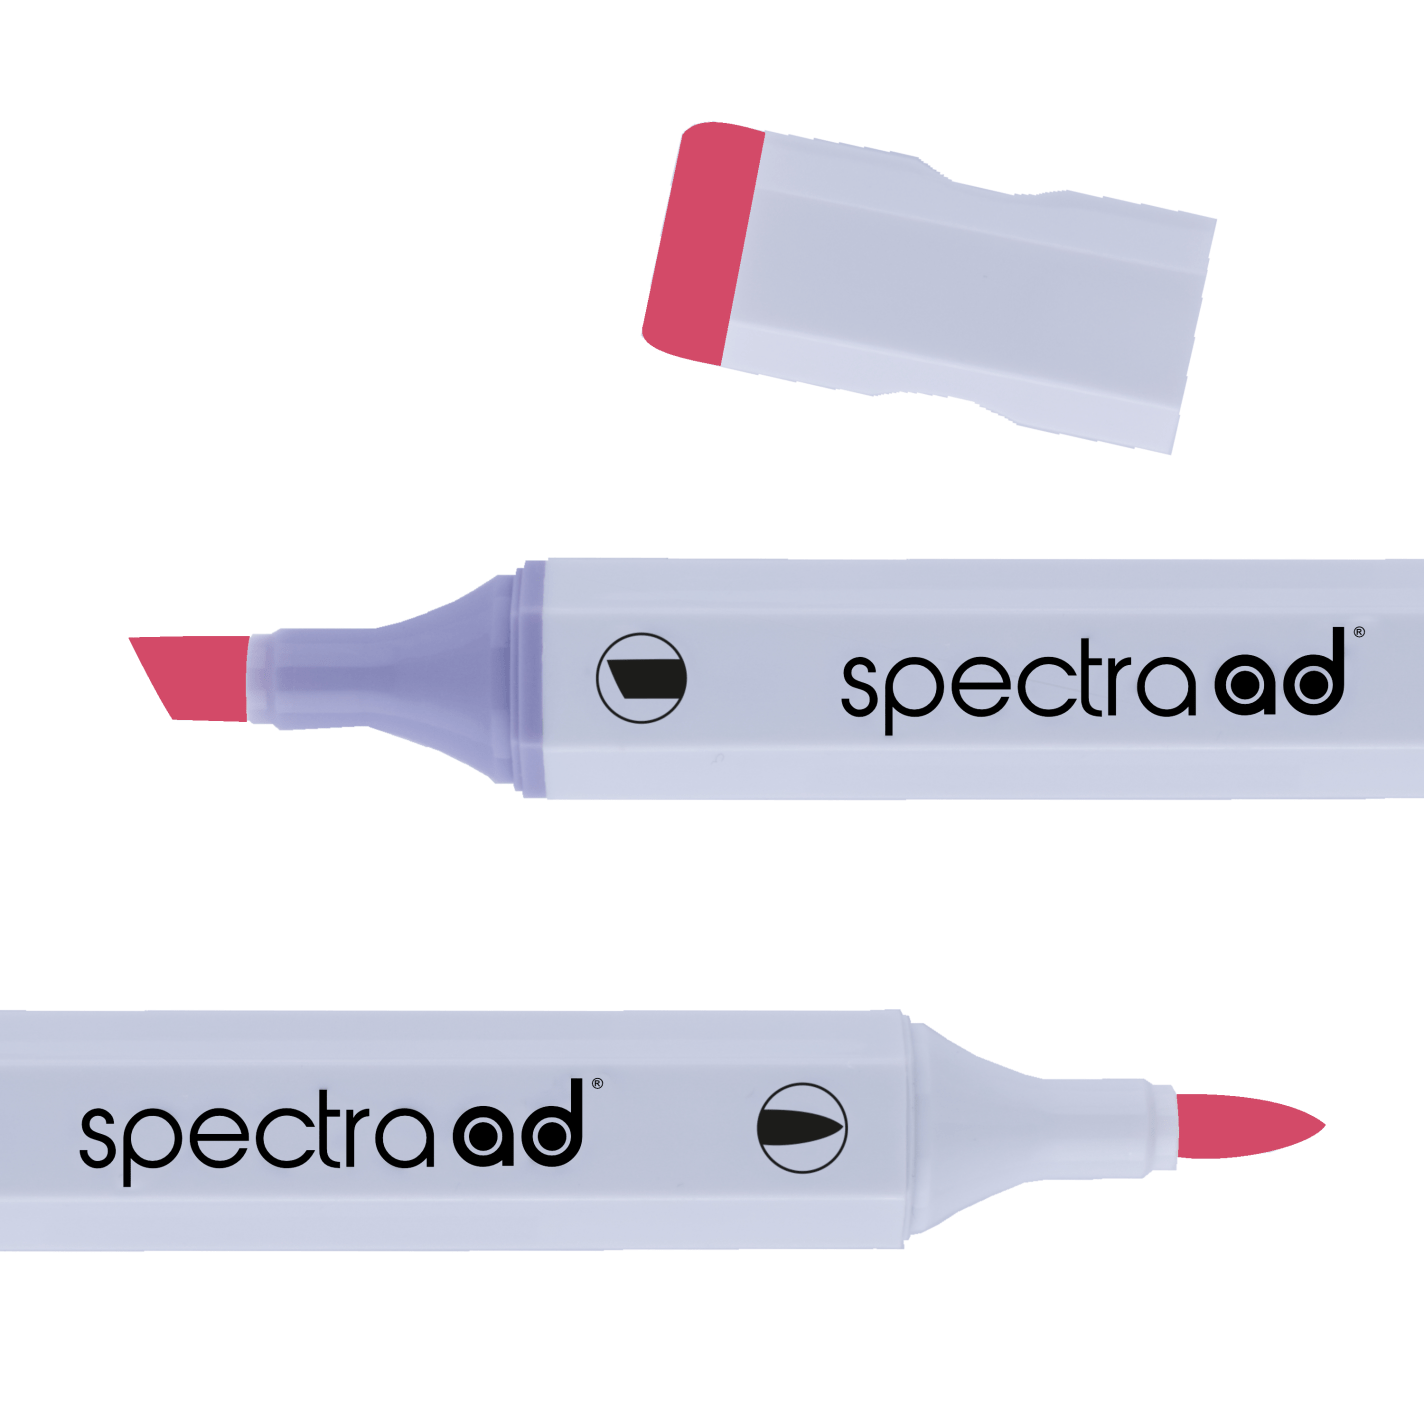 AD Marker Spectra Strawberry Red